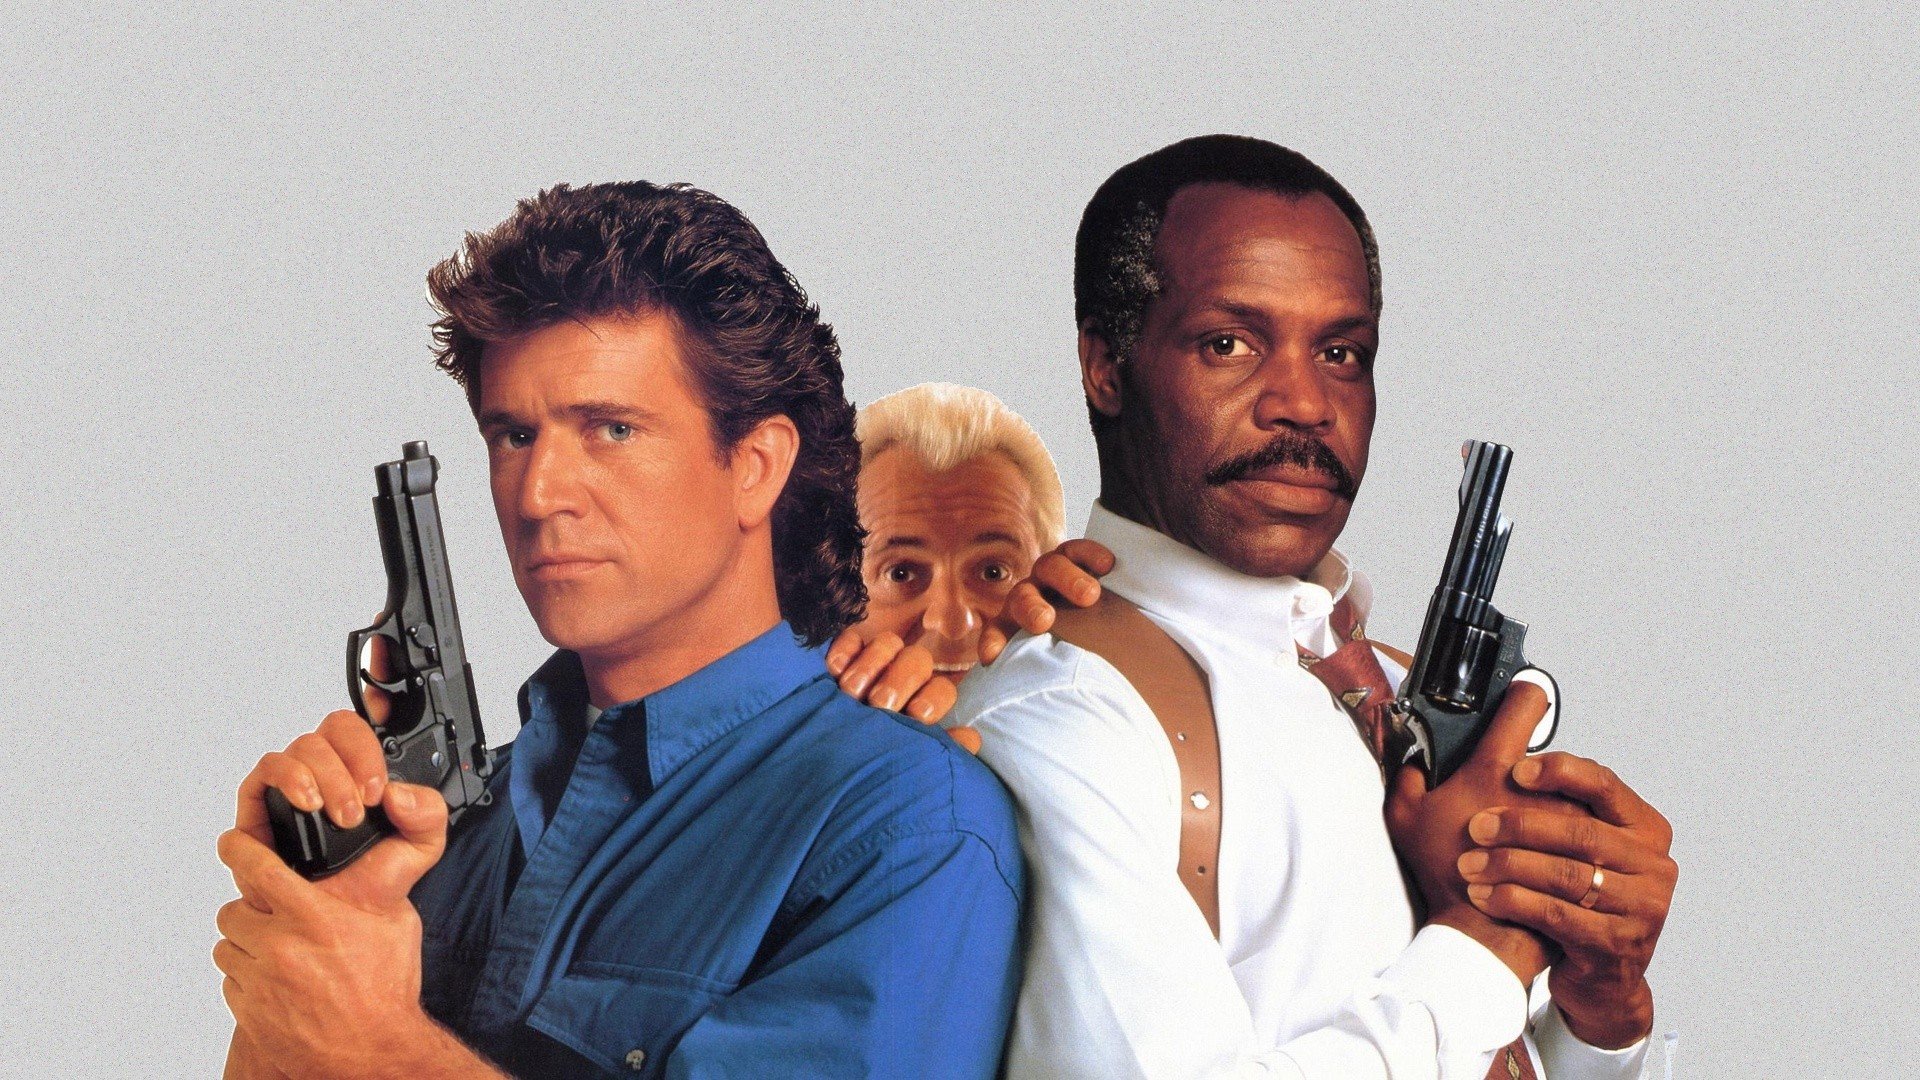 lethal, Weapon, Action, Thriller, Crime, Comedy Wallpaper